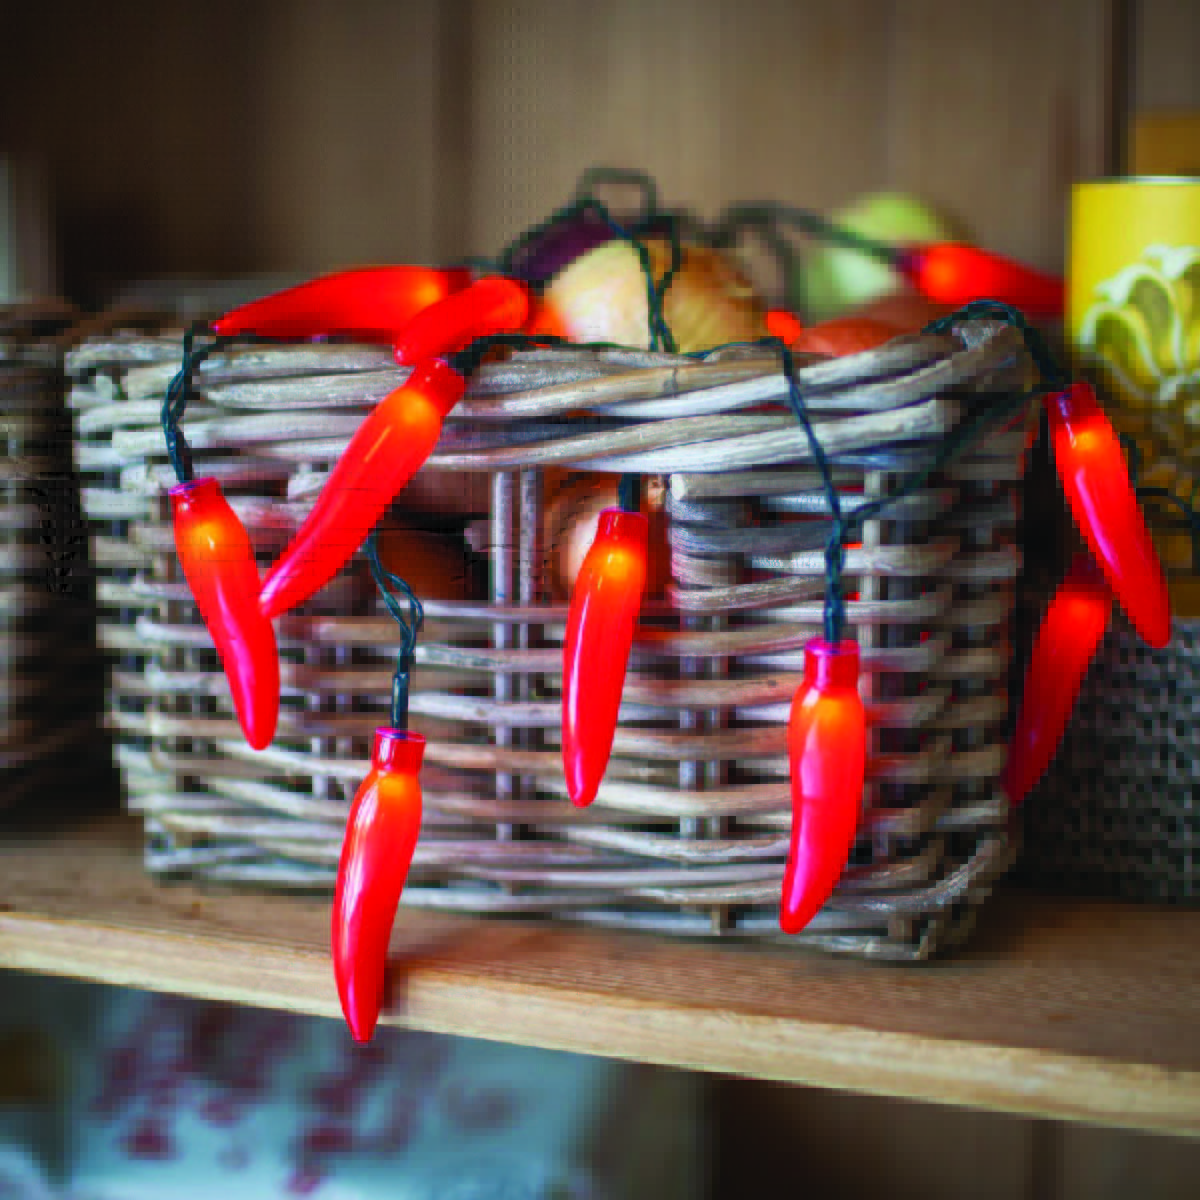 A rectangular basket with red chili pepper lights hanging out of it sitting on a wooden shelf.